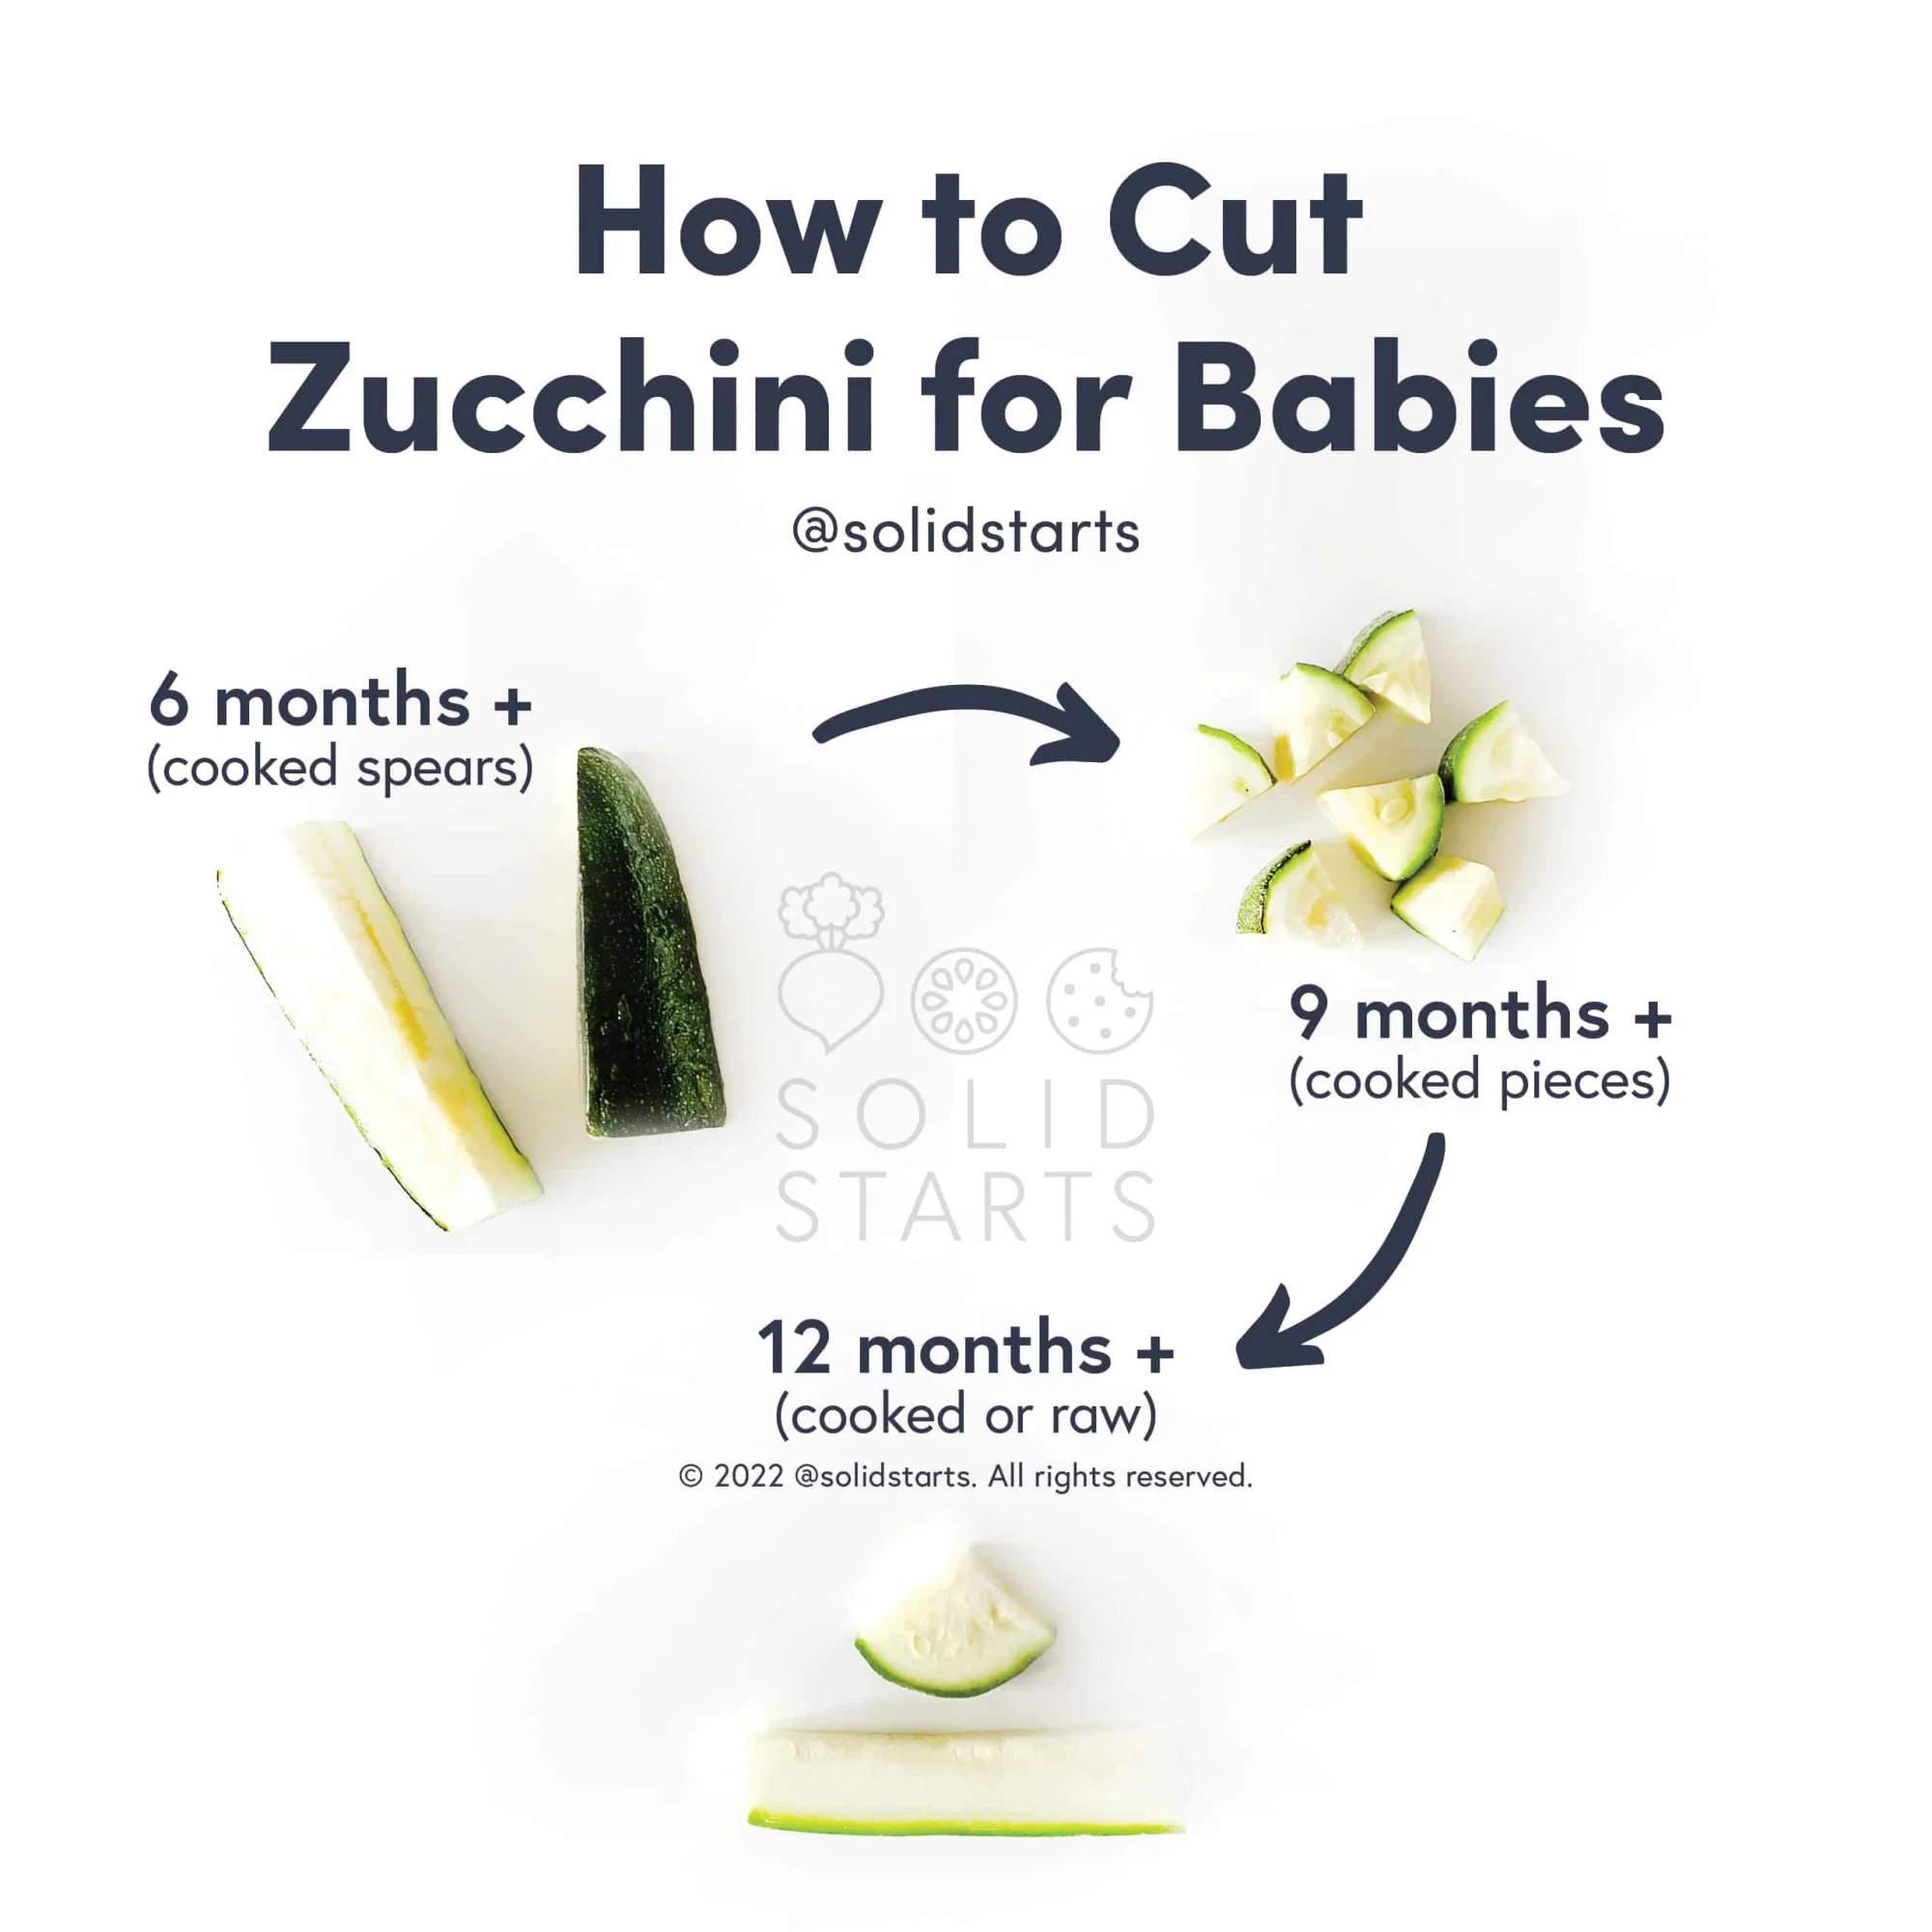 an infographic showing how to cut zucchini for babies by age: cooked spears for 6 months+, cooked bite size pieces for 9 months+, cooked or raw for 12 months+